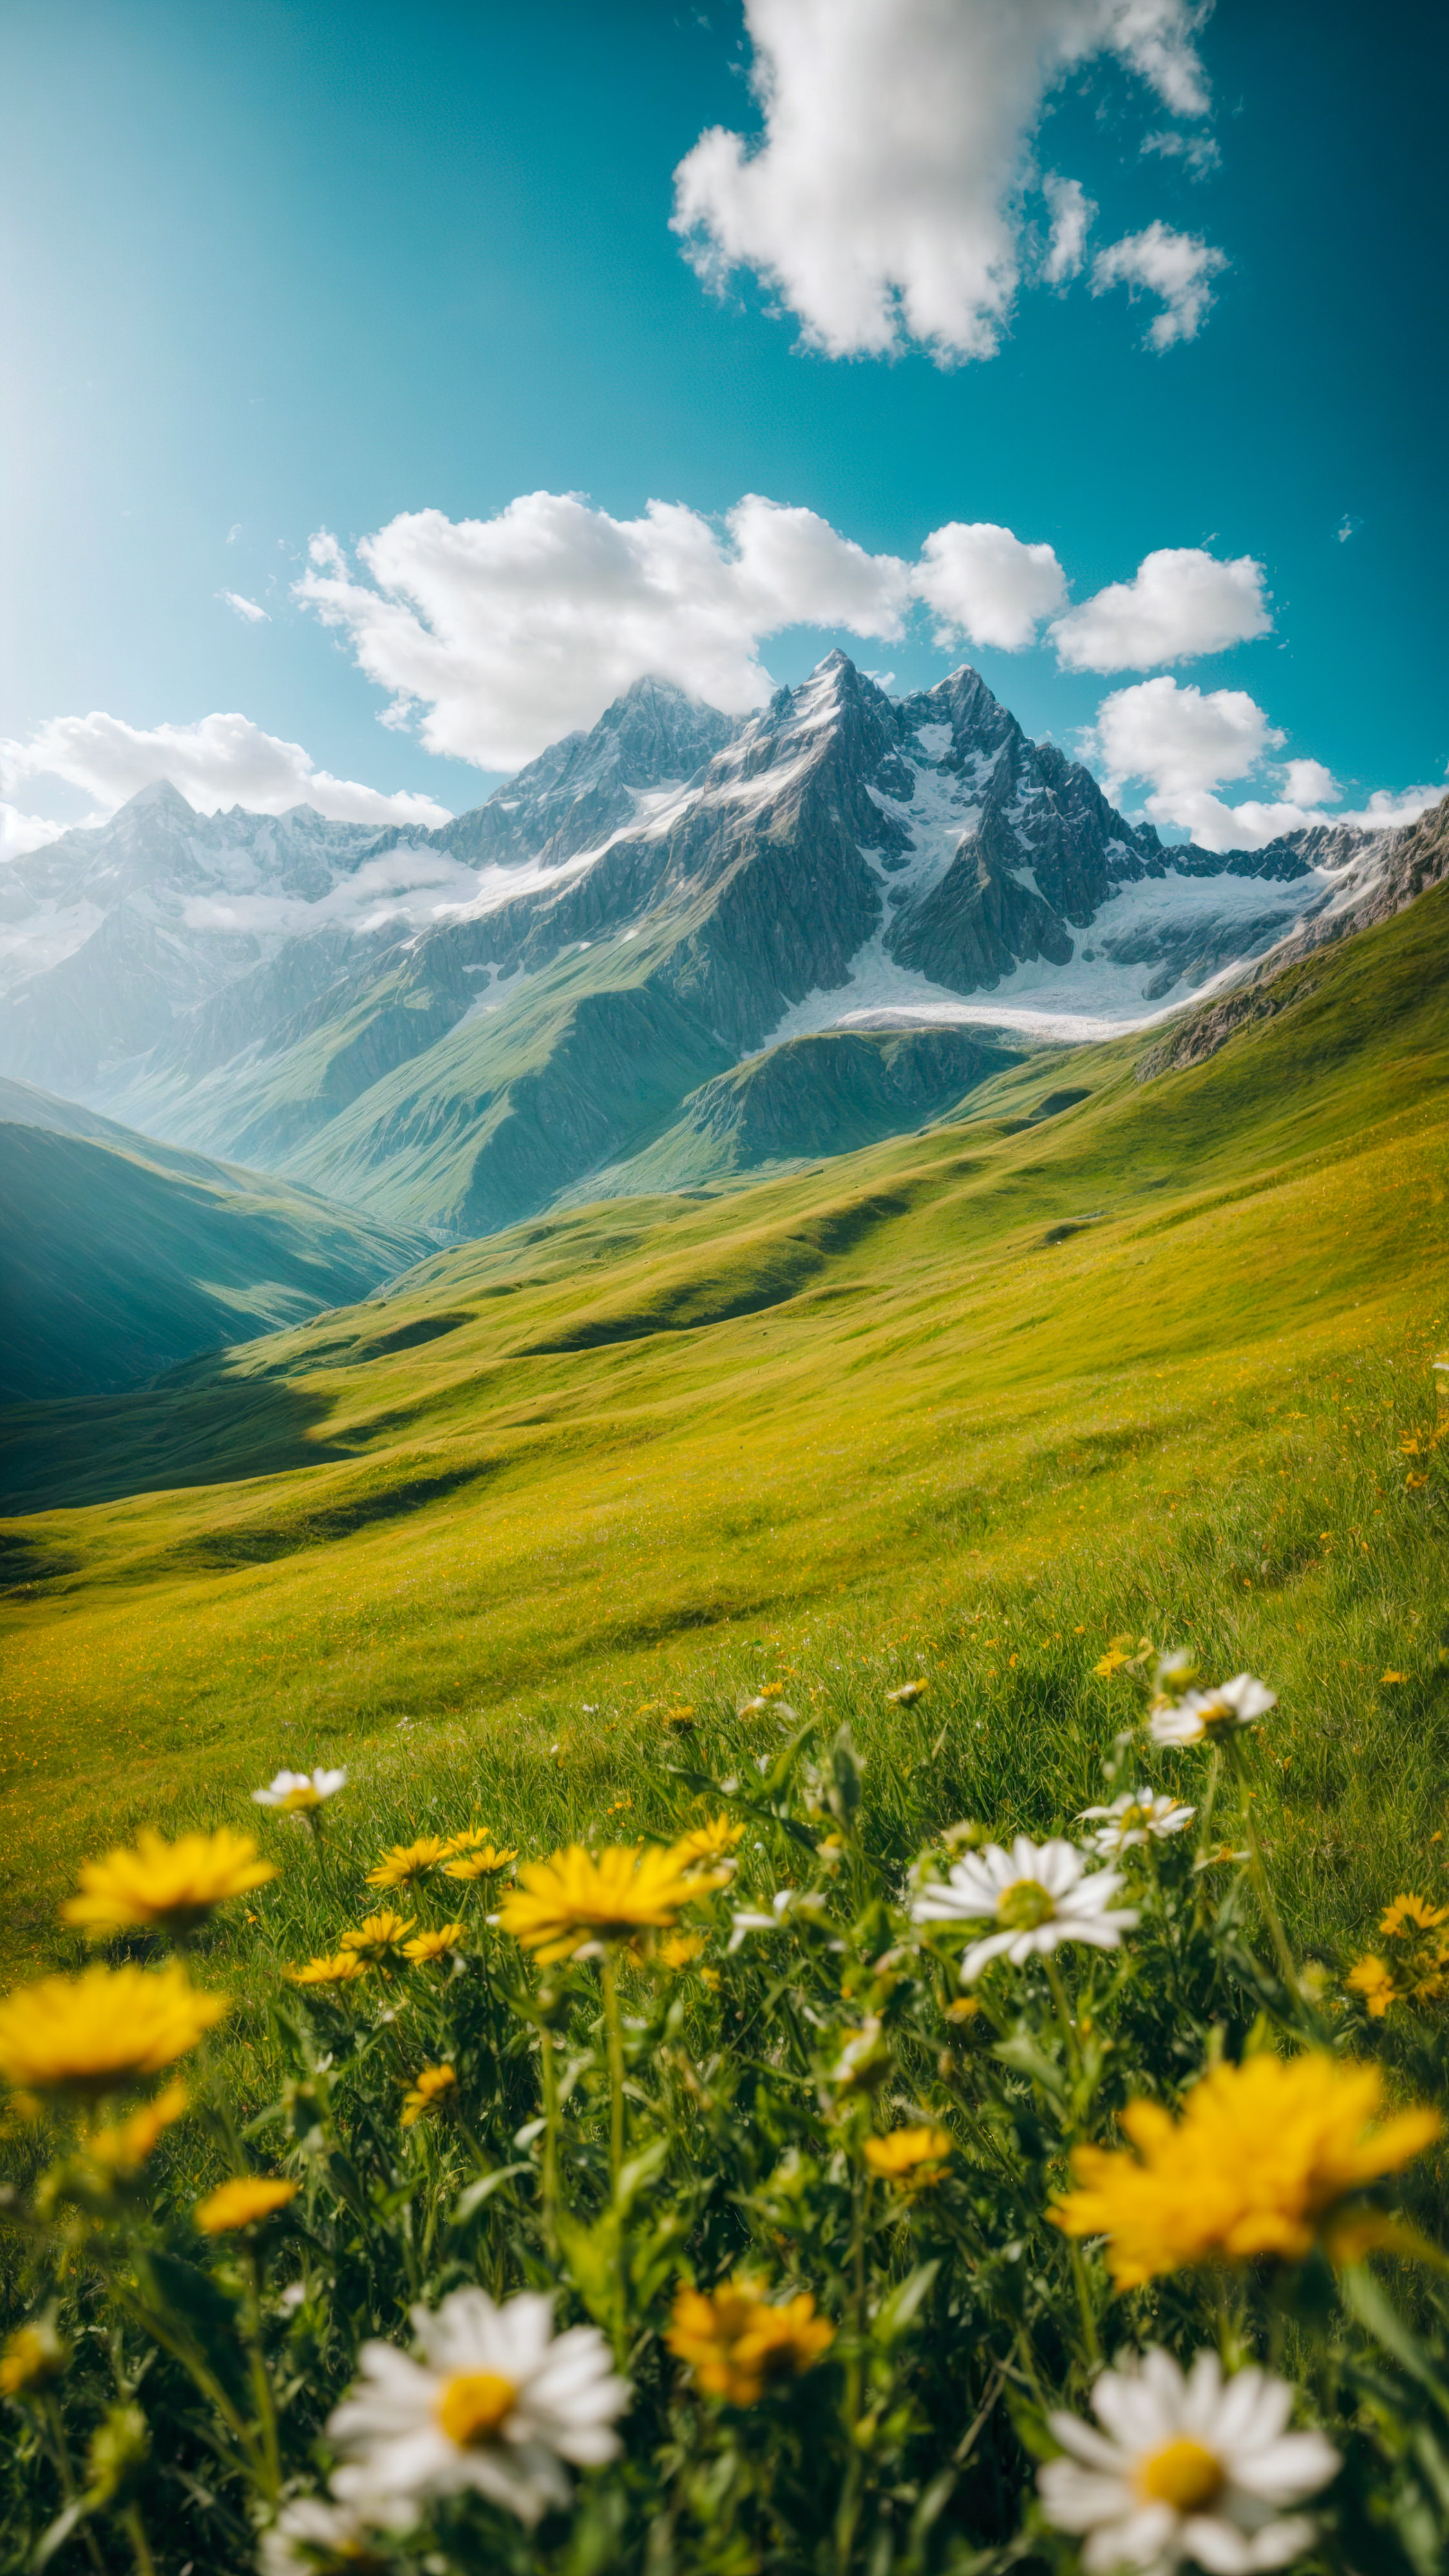 Bring the beauty of a sunny day in the mountains, with green meadows and wildflowers and a snow-capped peak, to your screen with this landscape wallpaper.